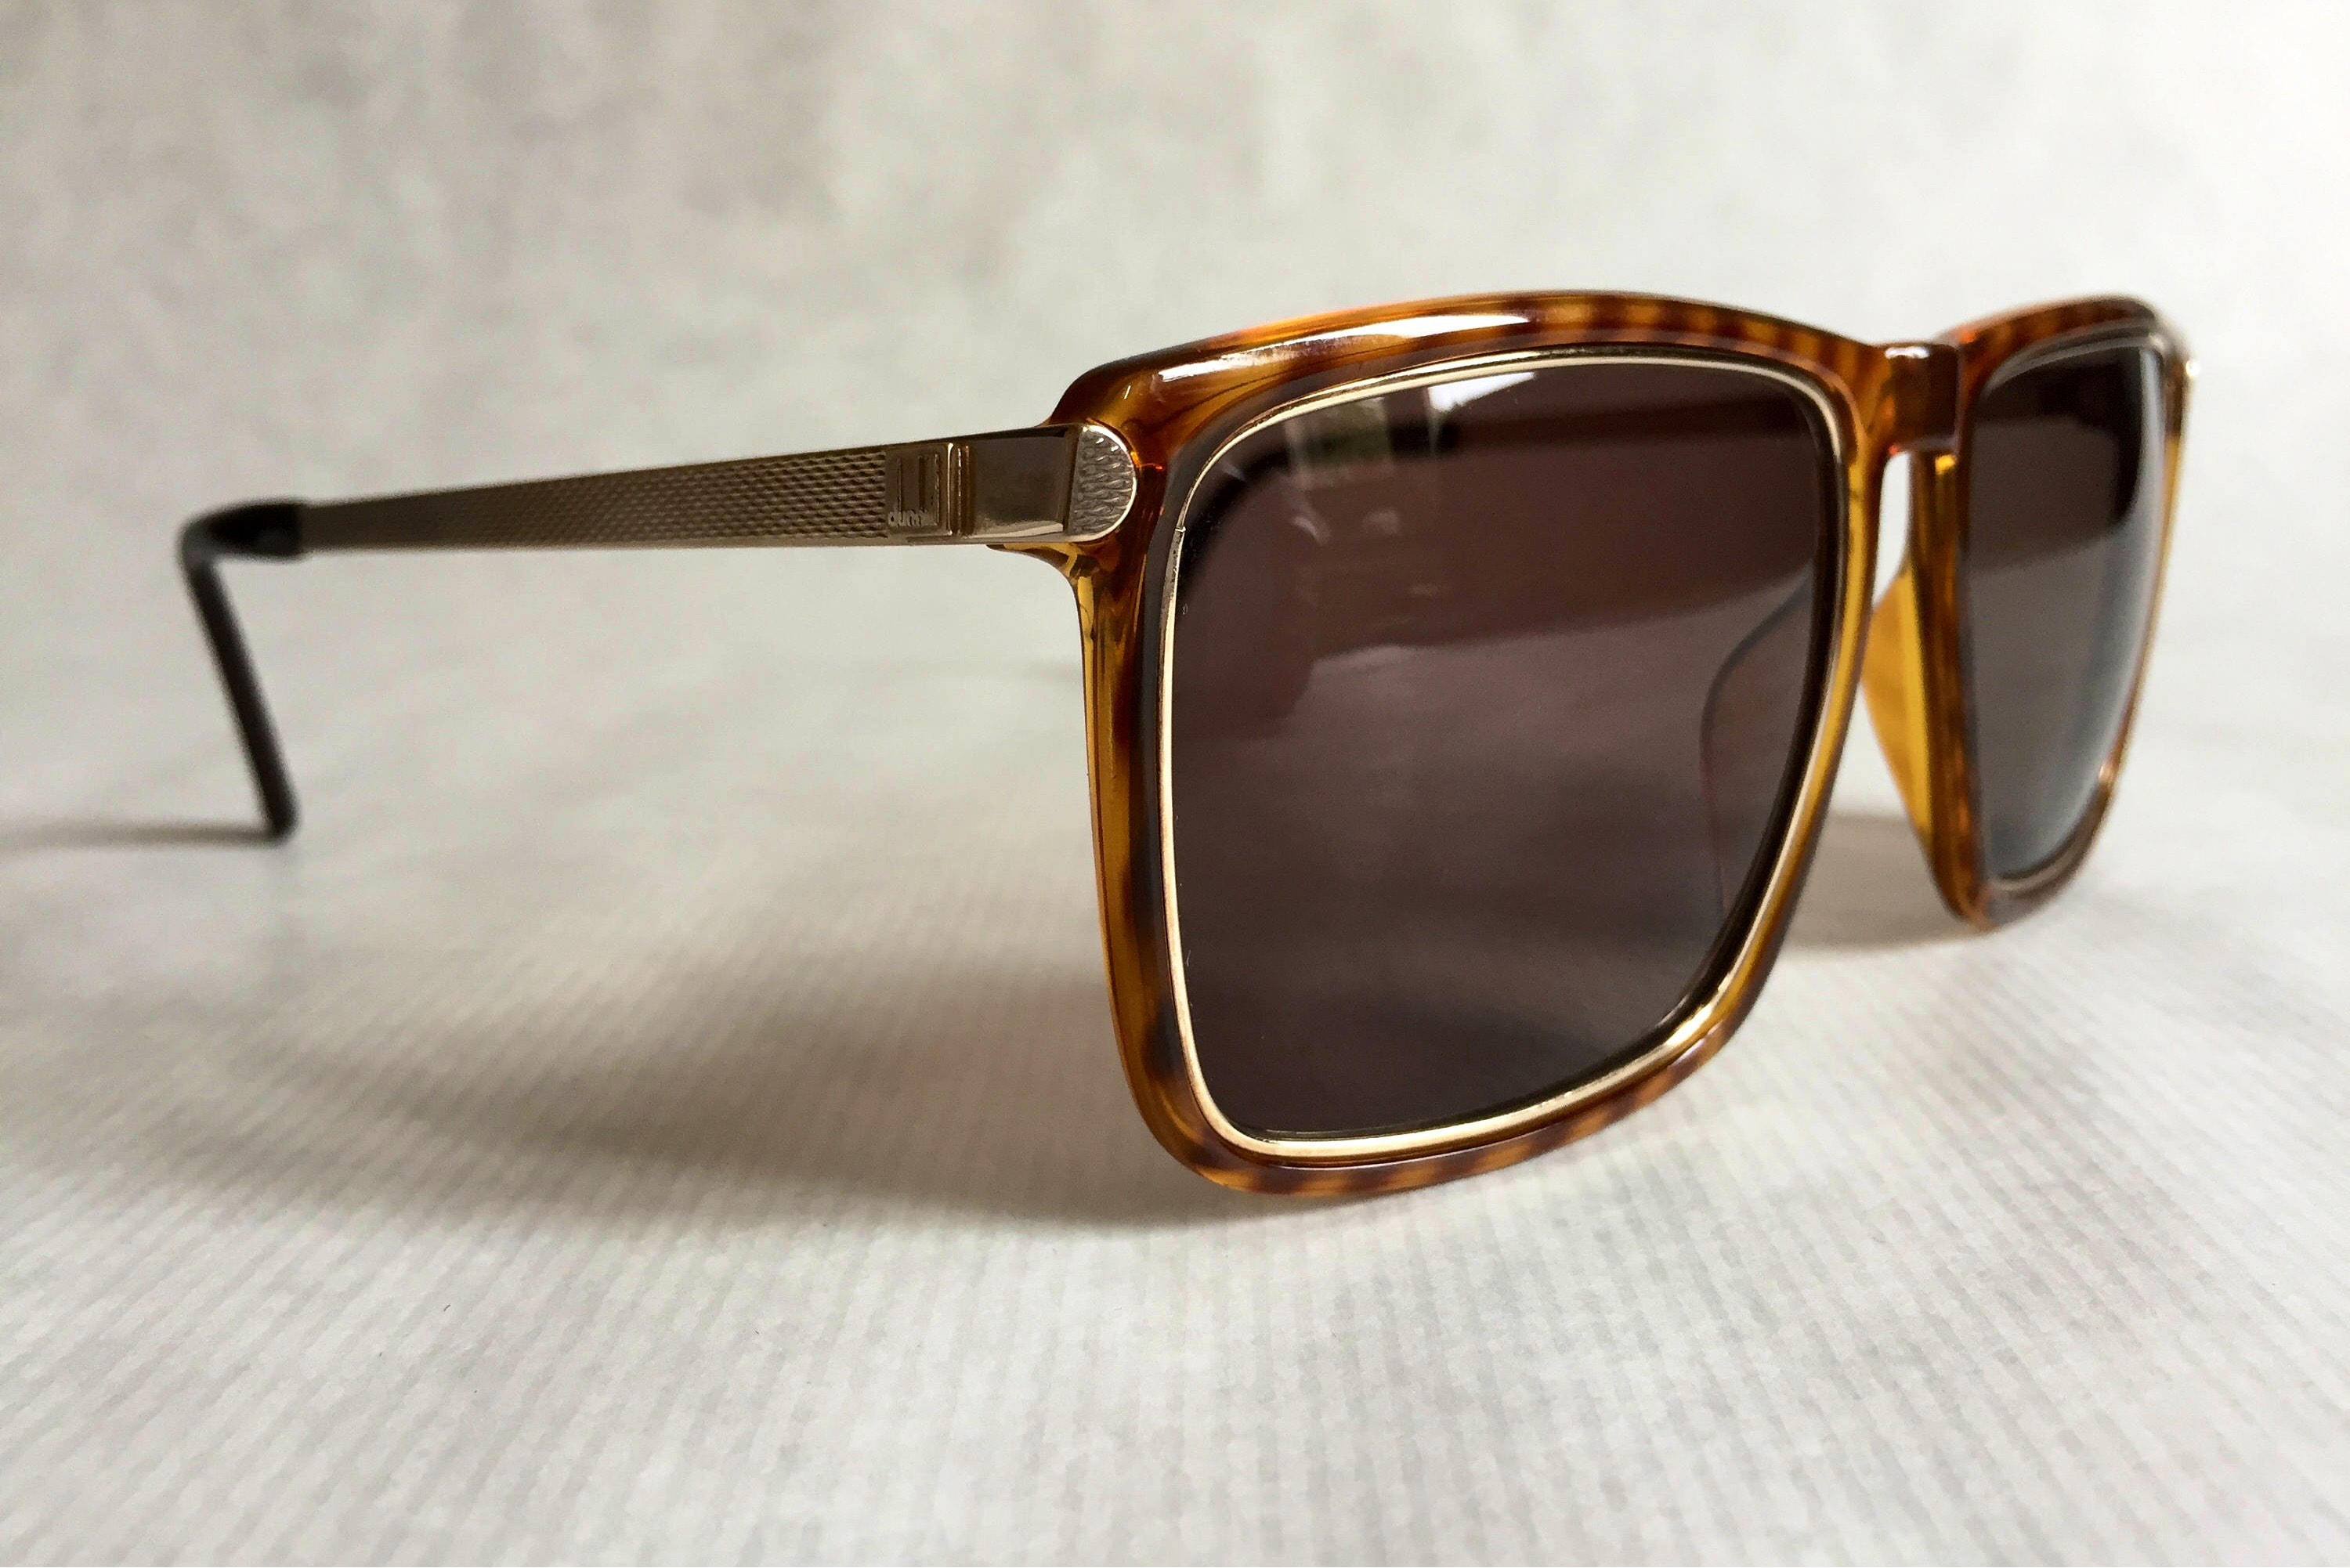 Dunhill 6069 Vintage Sunglasses New Unworn Deadstock Made in Germany